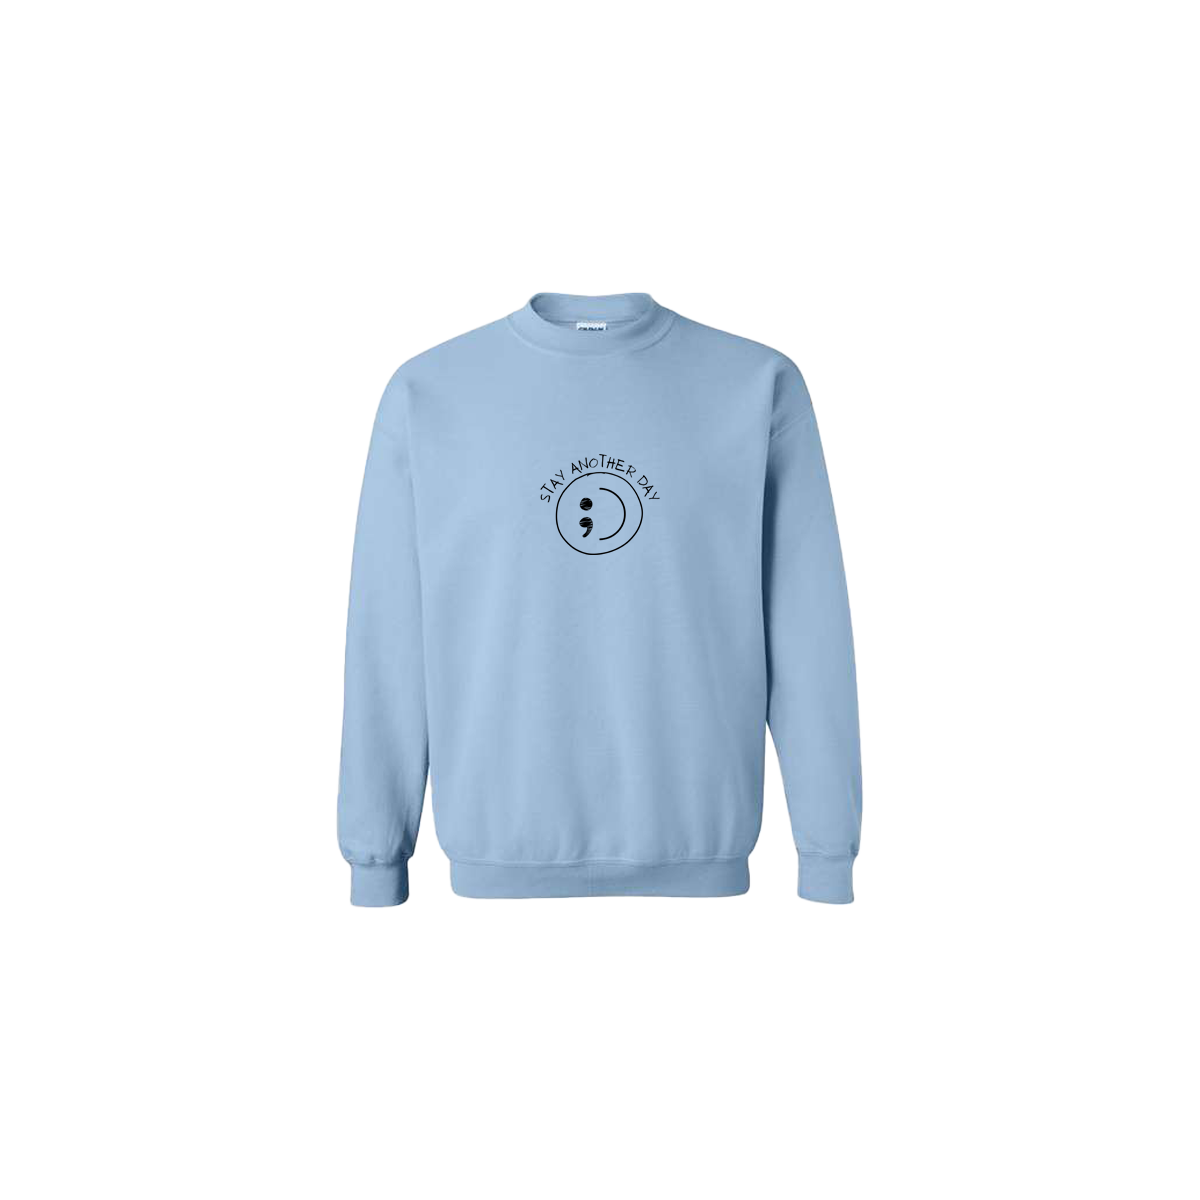 Stay Another Day Smiley Face Embroidered Light Blue Crewneck - Mental Health Awareness Clothing